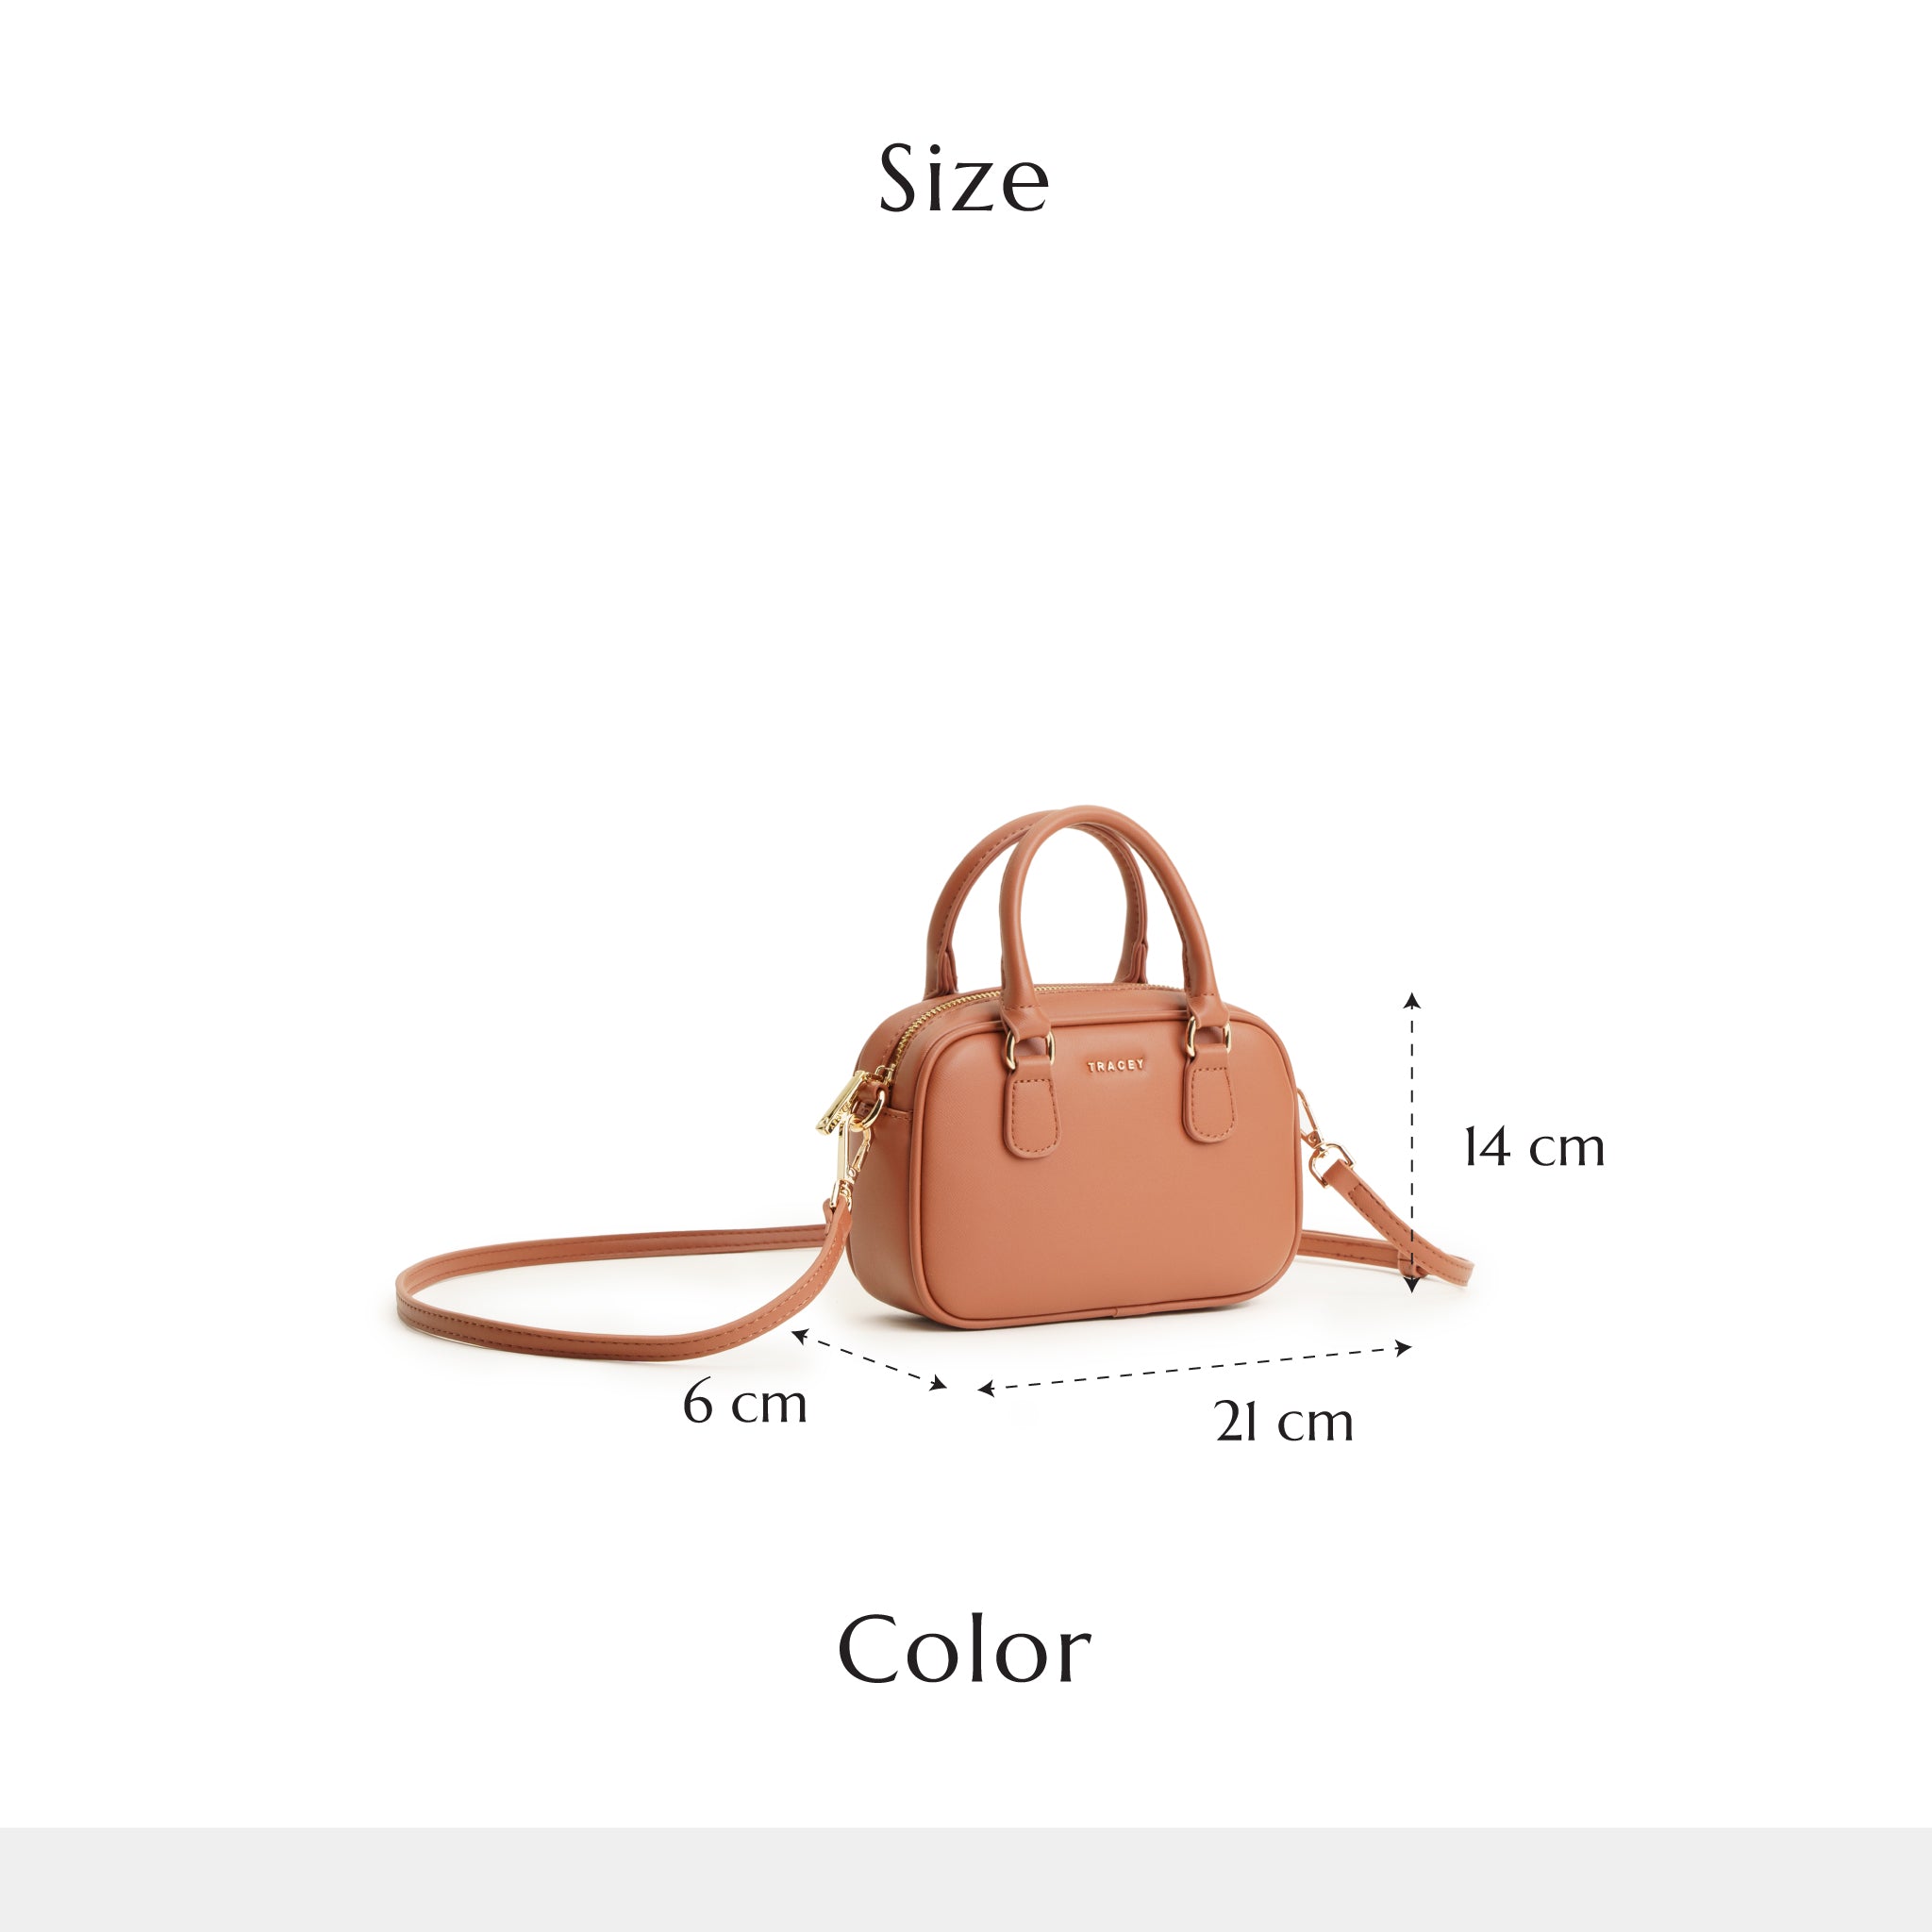 Review] Tracey vegan leather bags from Malaysia: material, quality